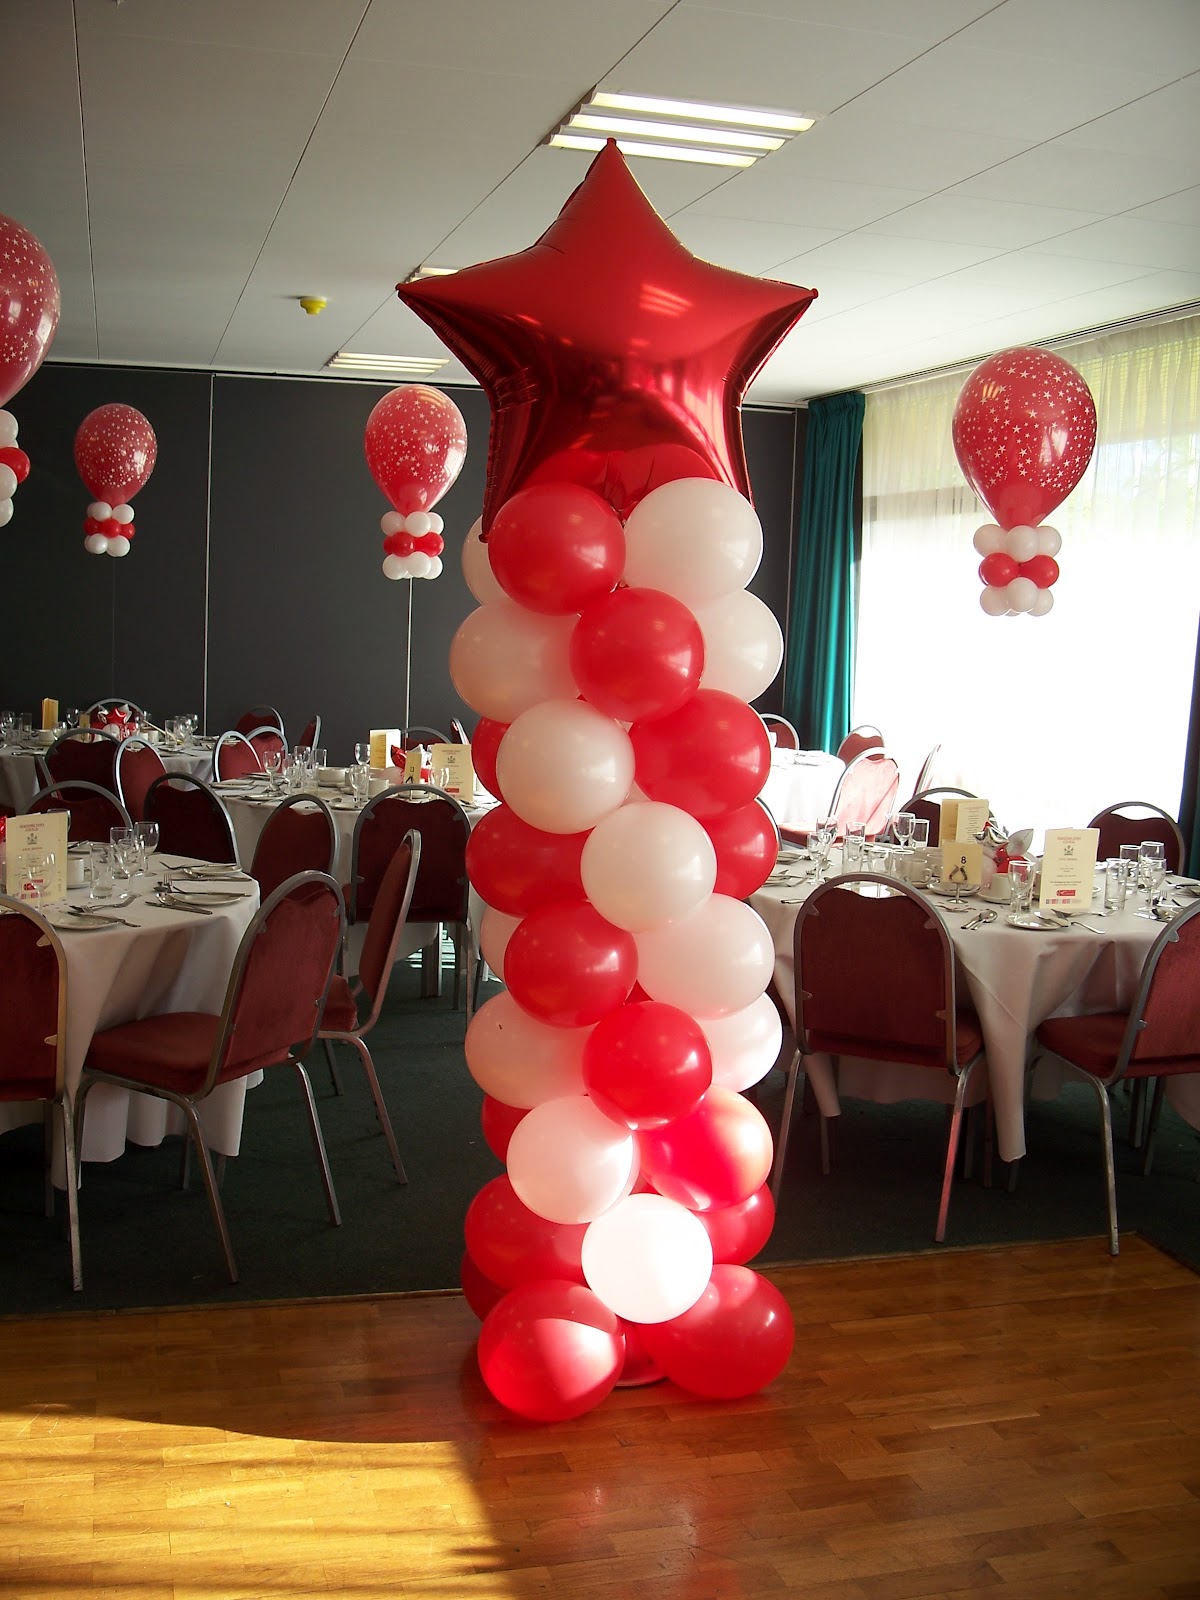 to Party Buds' Balloon World! Professional Balloon Decorators